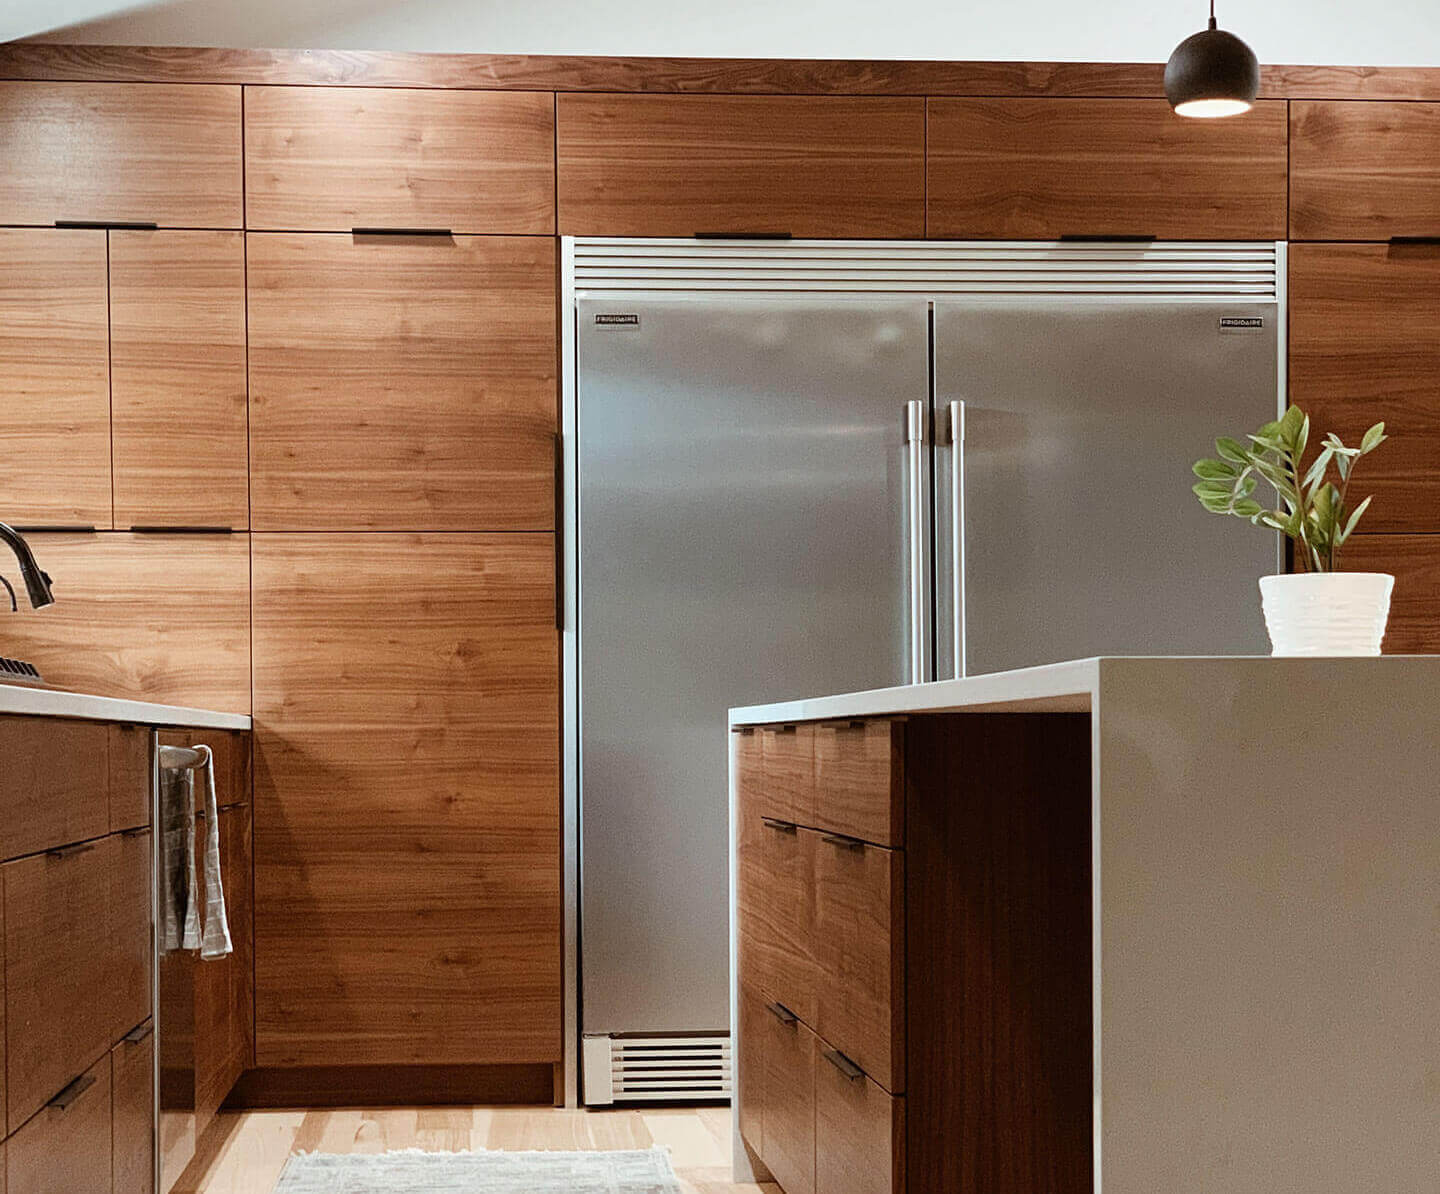 large stainless steel refrigerator in kitchen